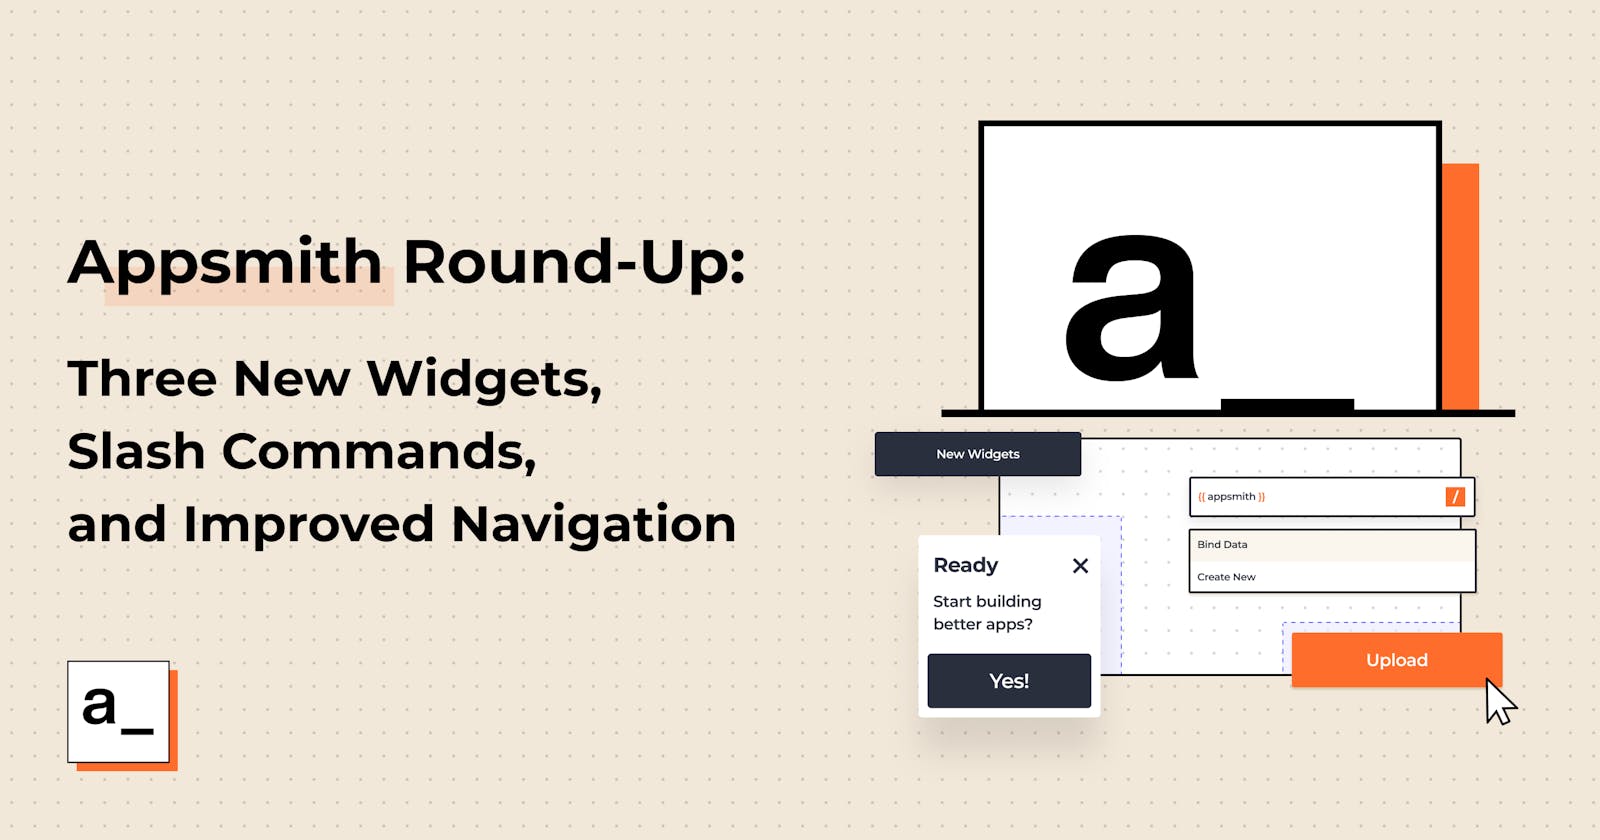 Appsmith Round-Up: Three New Widgets, Slash Commands, and Improved Navigation